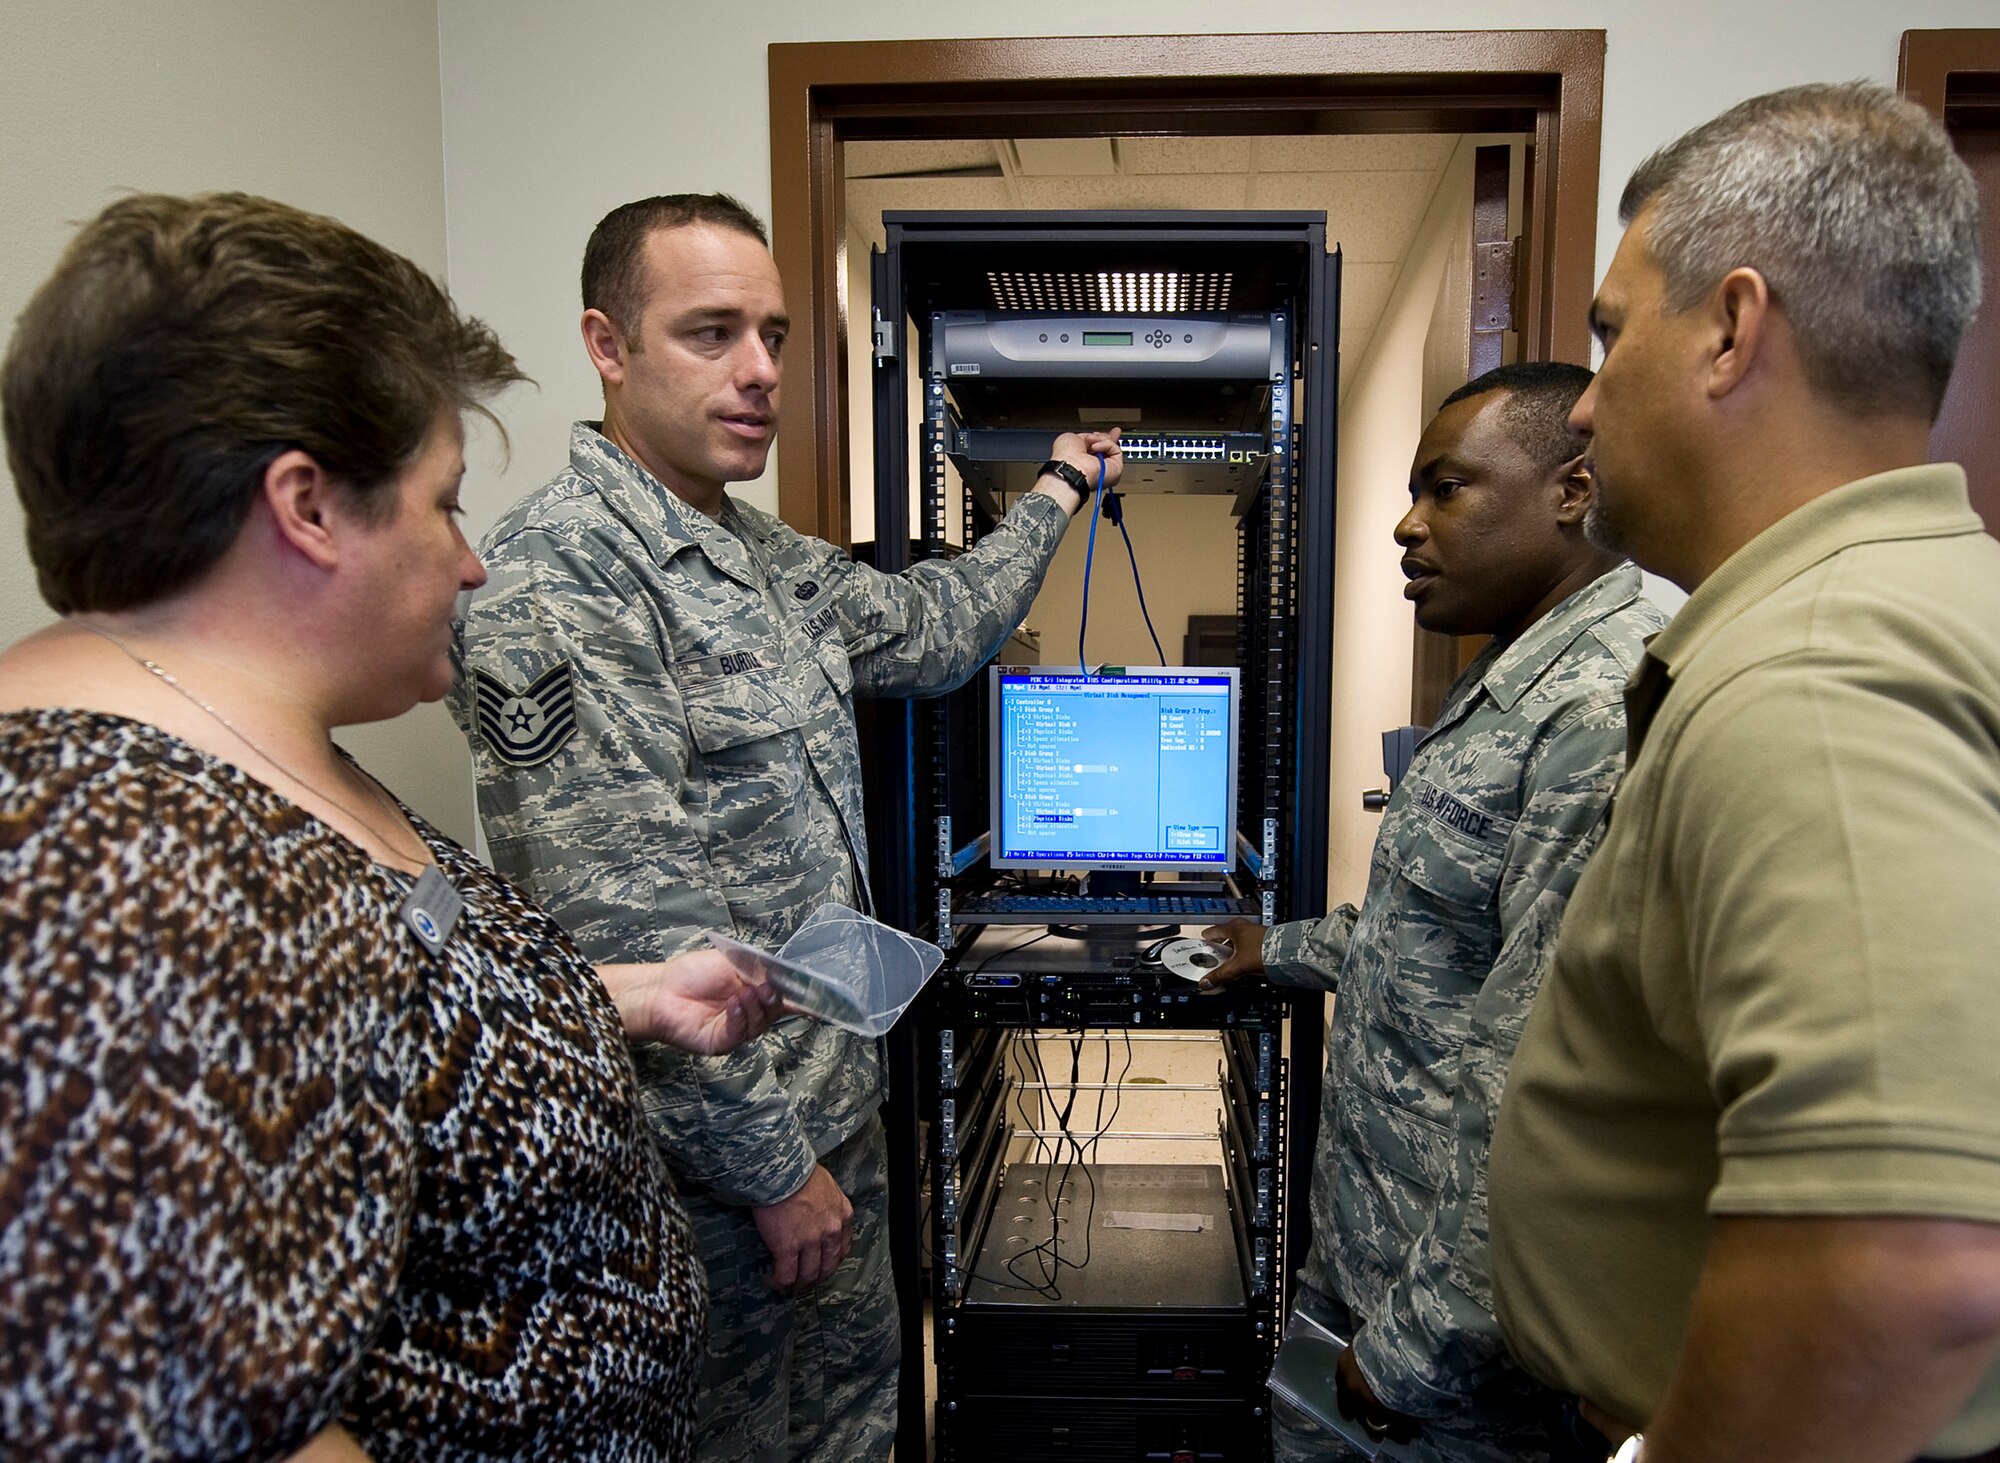 Air Force Engineering and Technical Service employees train active duty members on how to program a computer based scenario simulator on Barksdale Air Force Base, La., Aug. 9. AFETS recruits mostly prior military members to remain as part of the force and work alongside active duty maintenance and communications Airmen. (U.S. Air Force photo/Staff Sgt. Chad Warren)(RELEASED)